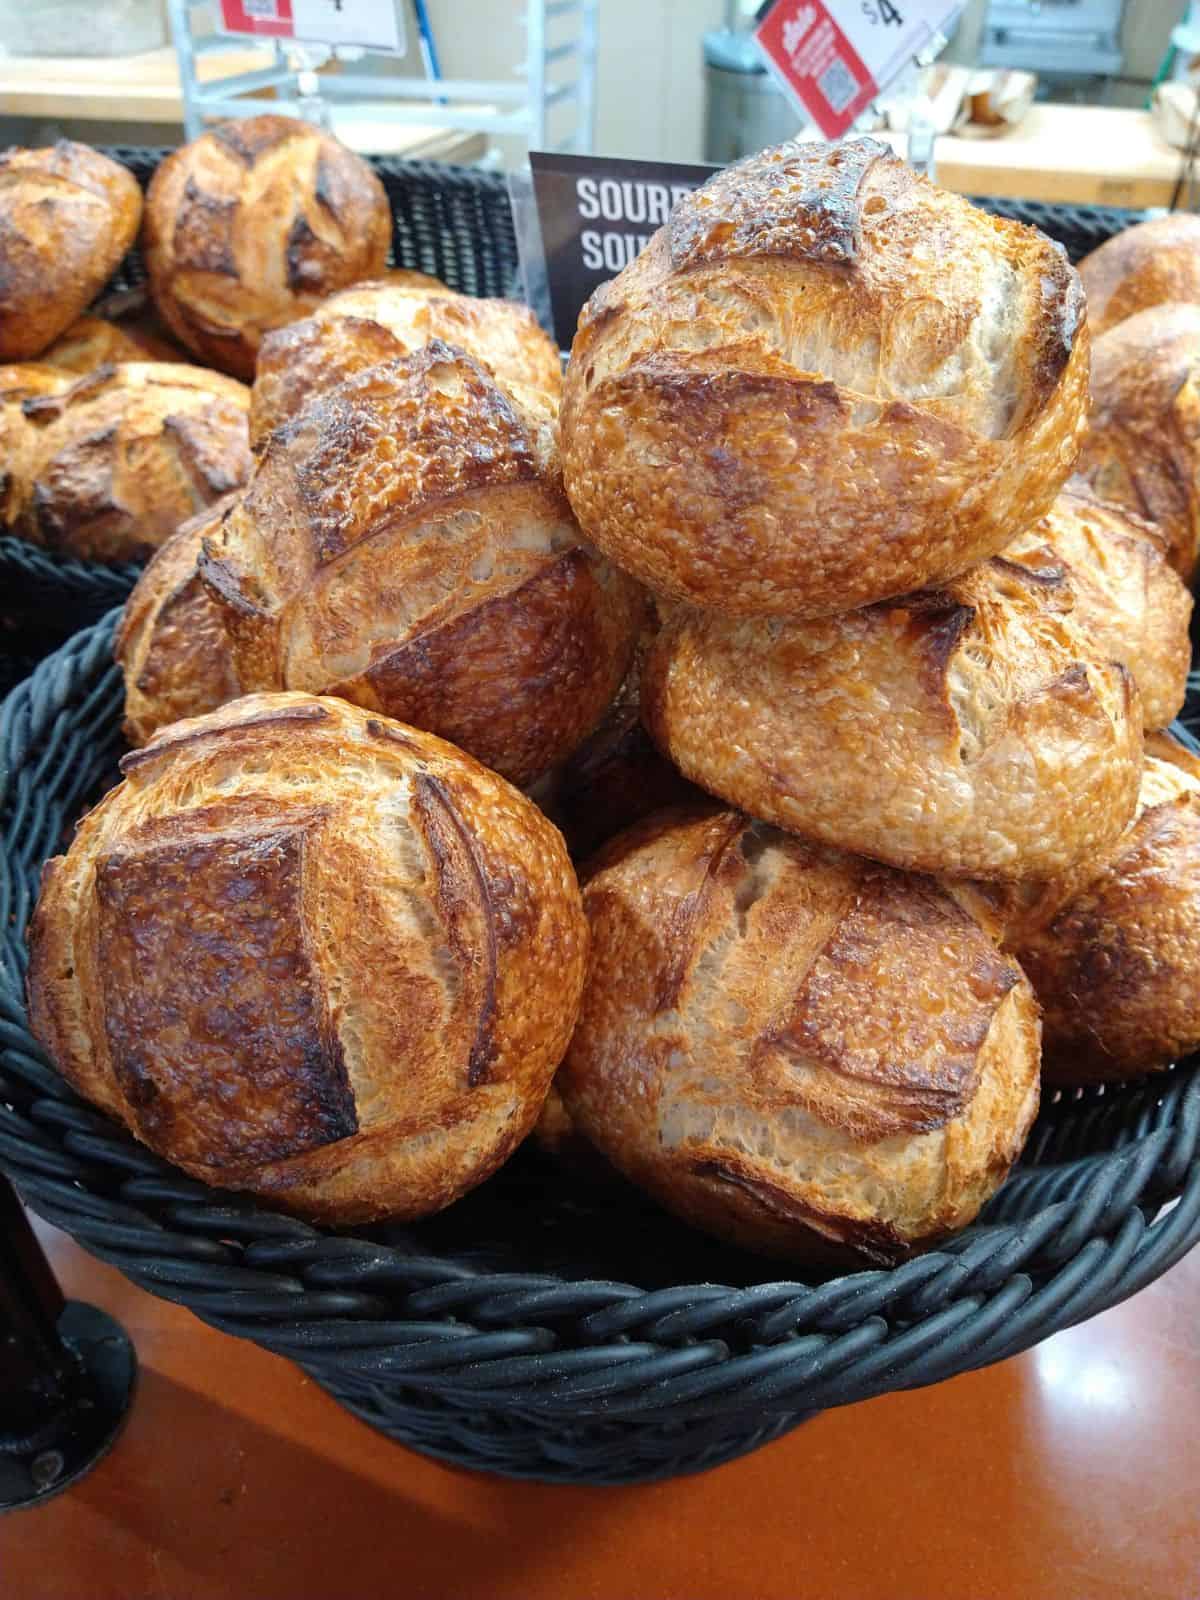 Sourdough bread bowls in a black basket on display at a grocery store bakery department. 